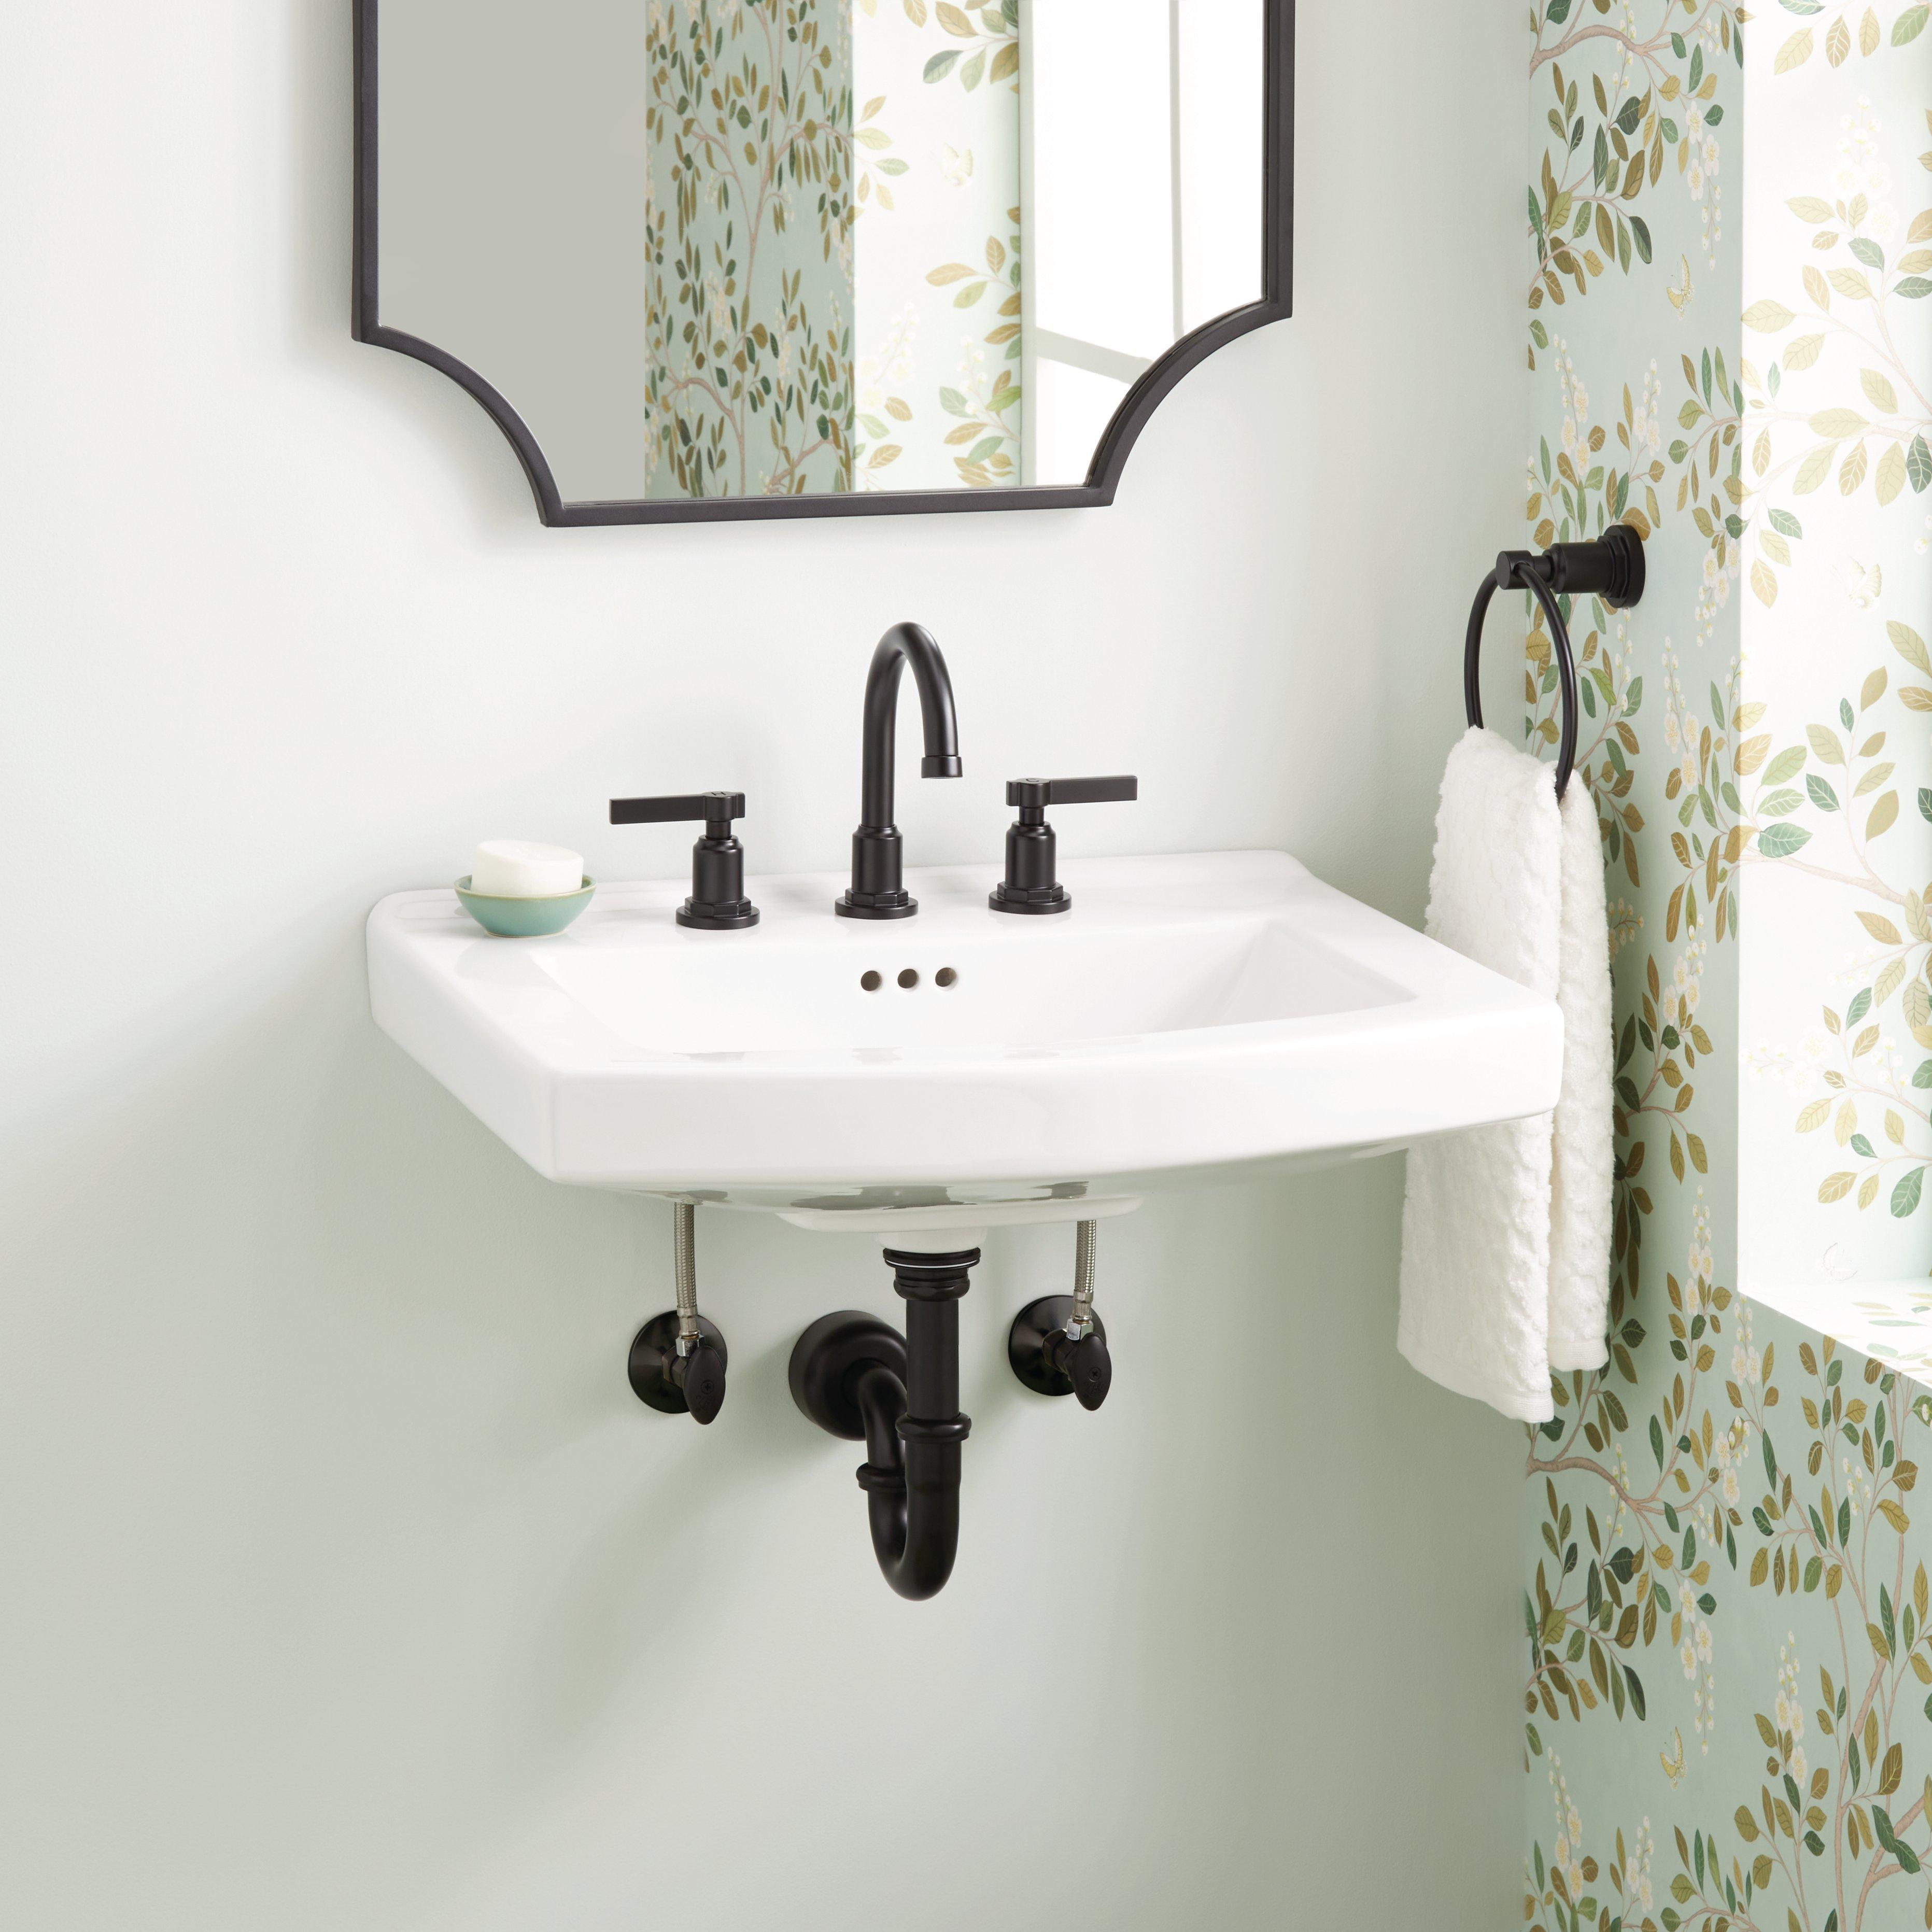 A Pennfield porcelain wall-mounted sink, white with black trim, is the focal point in this guest bathroom with pale green walls, a flowered accent wall and a mirror with a black frame.